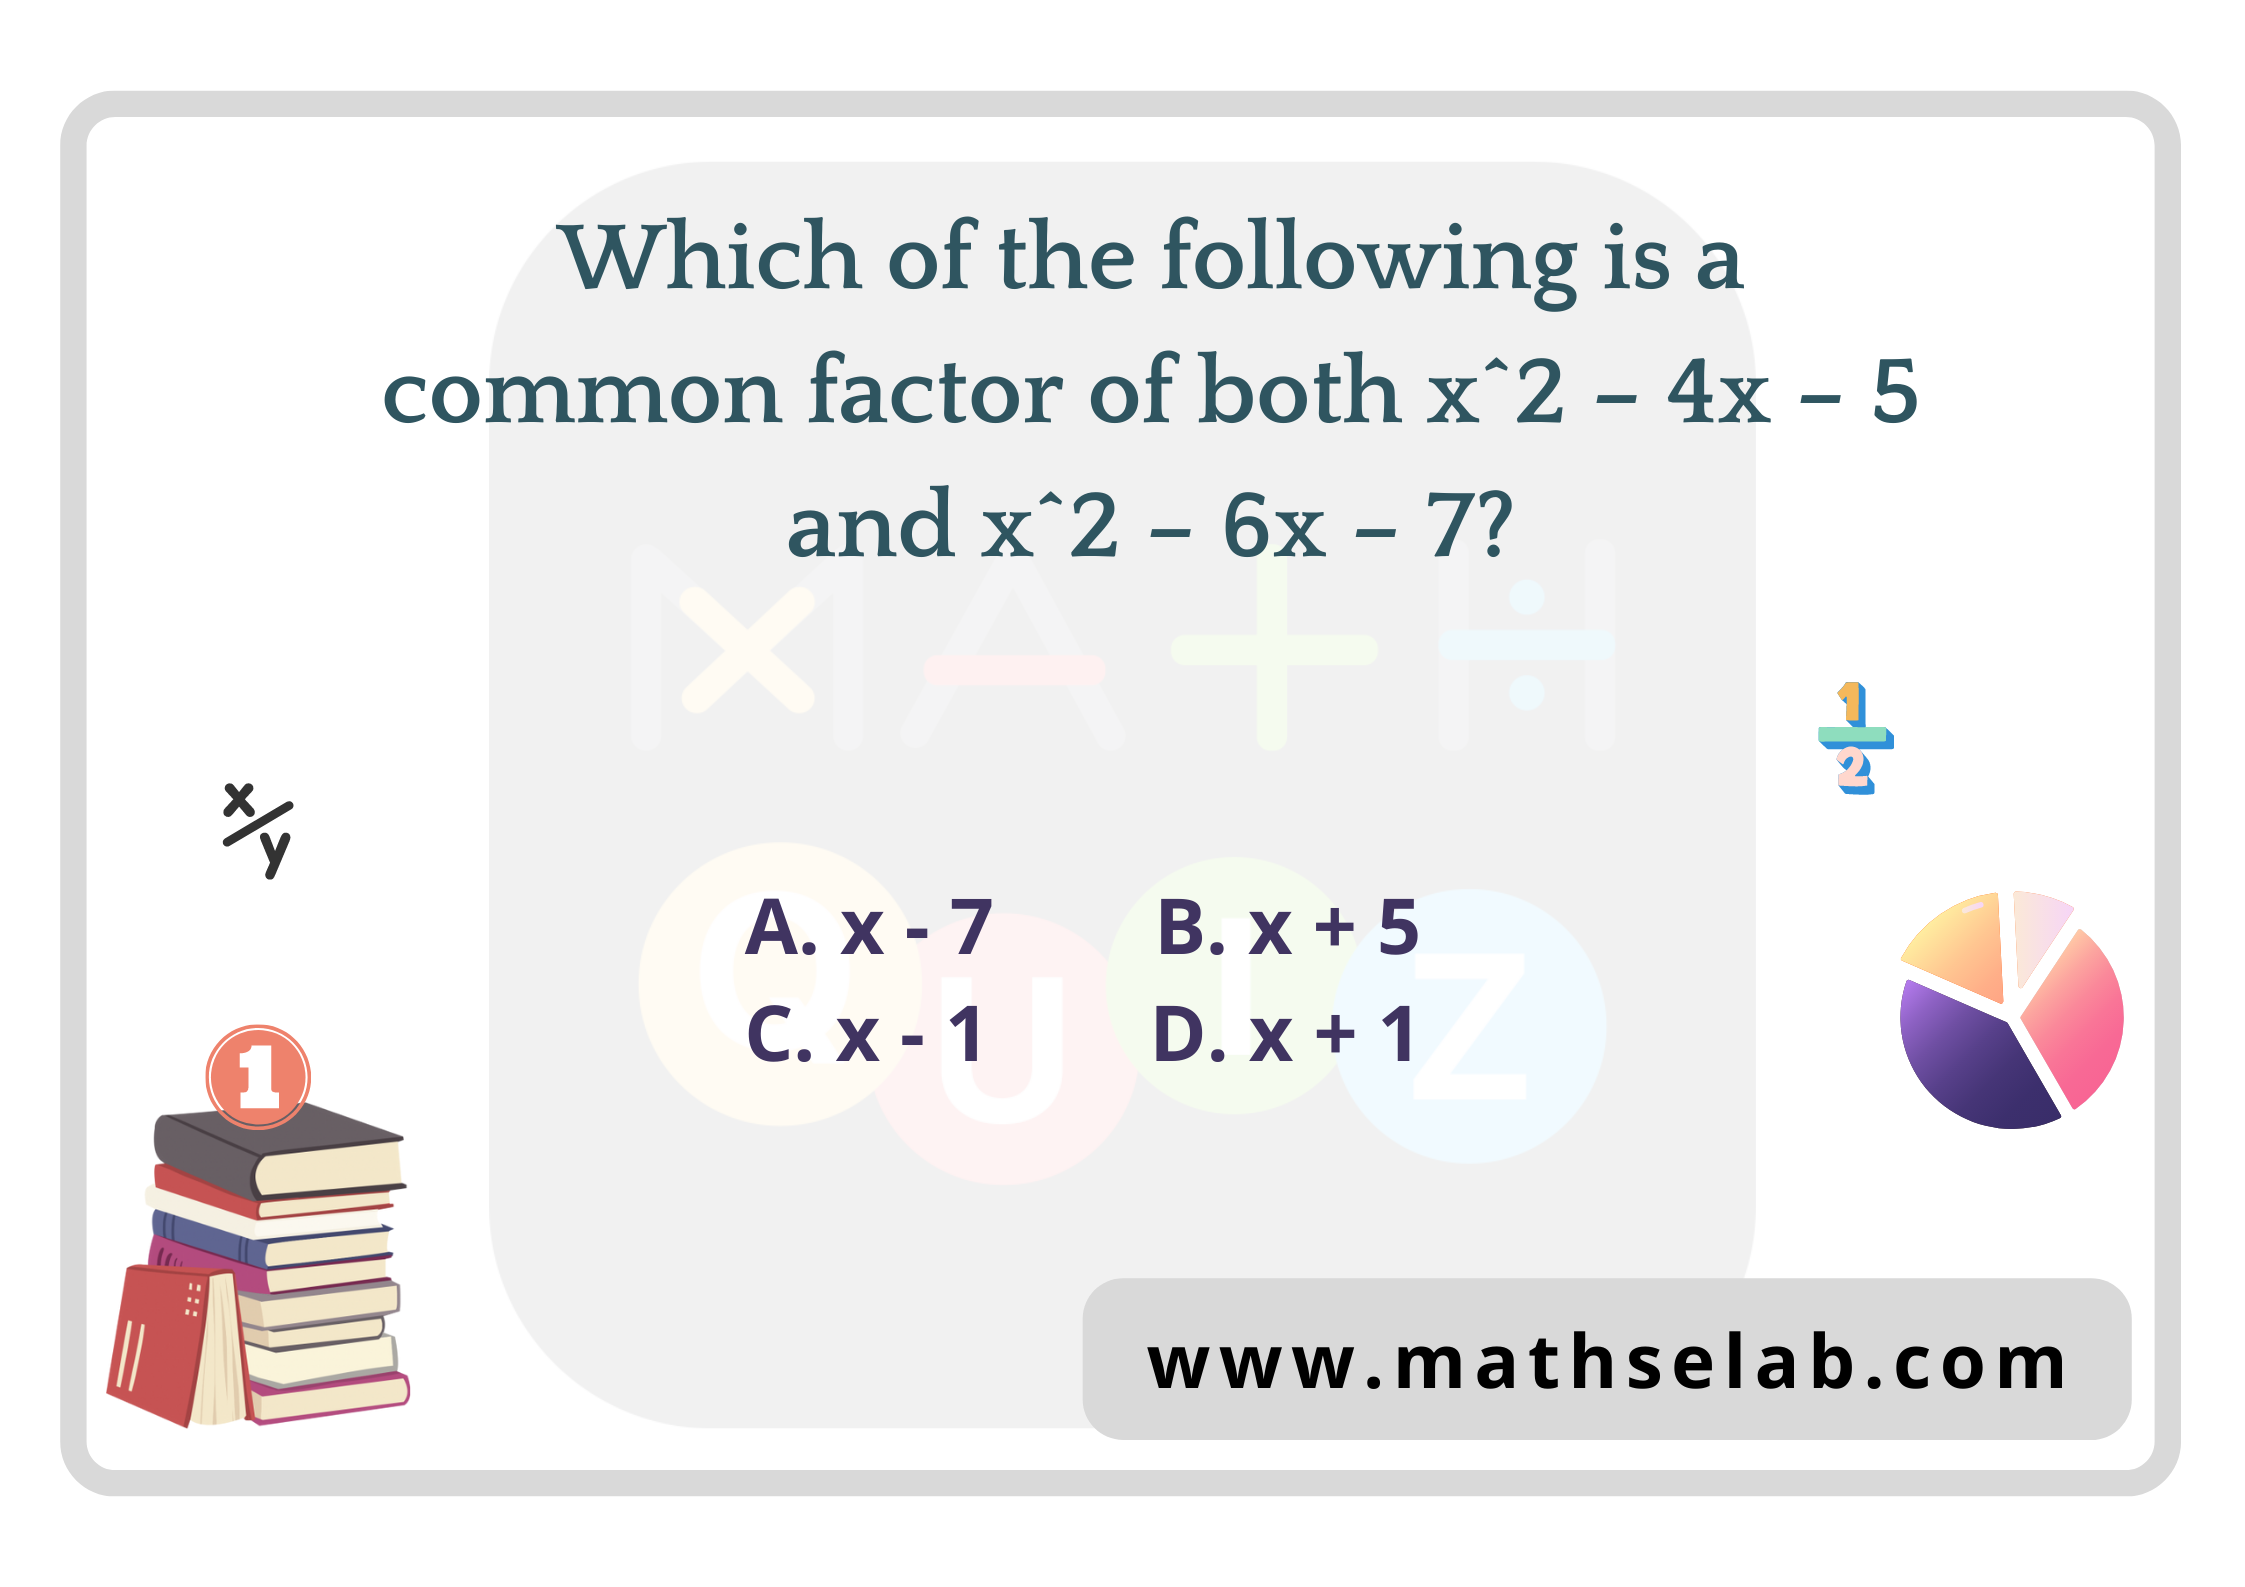 Which of the following is a common factor of both x^2 – 4x – 5 and x^2 – 6x – 7?